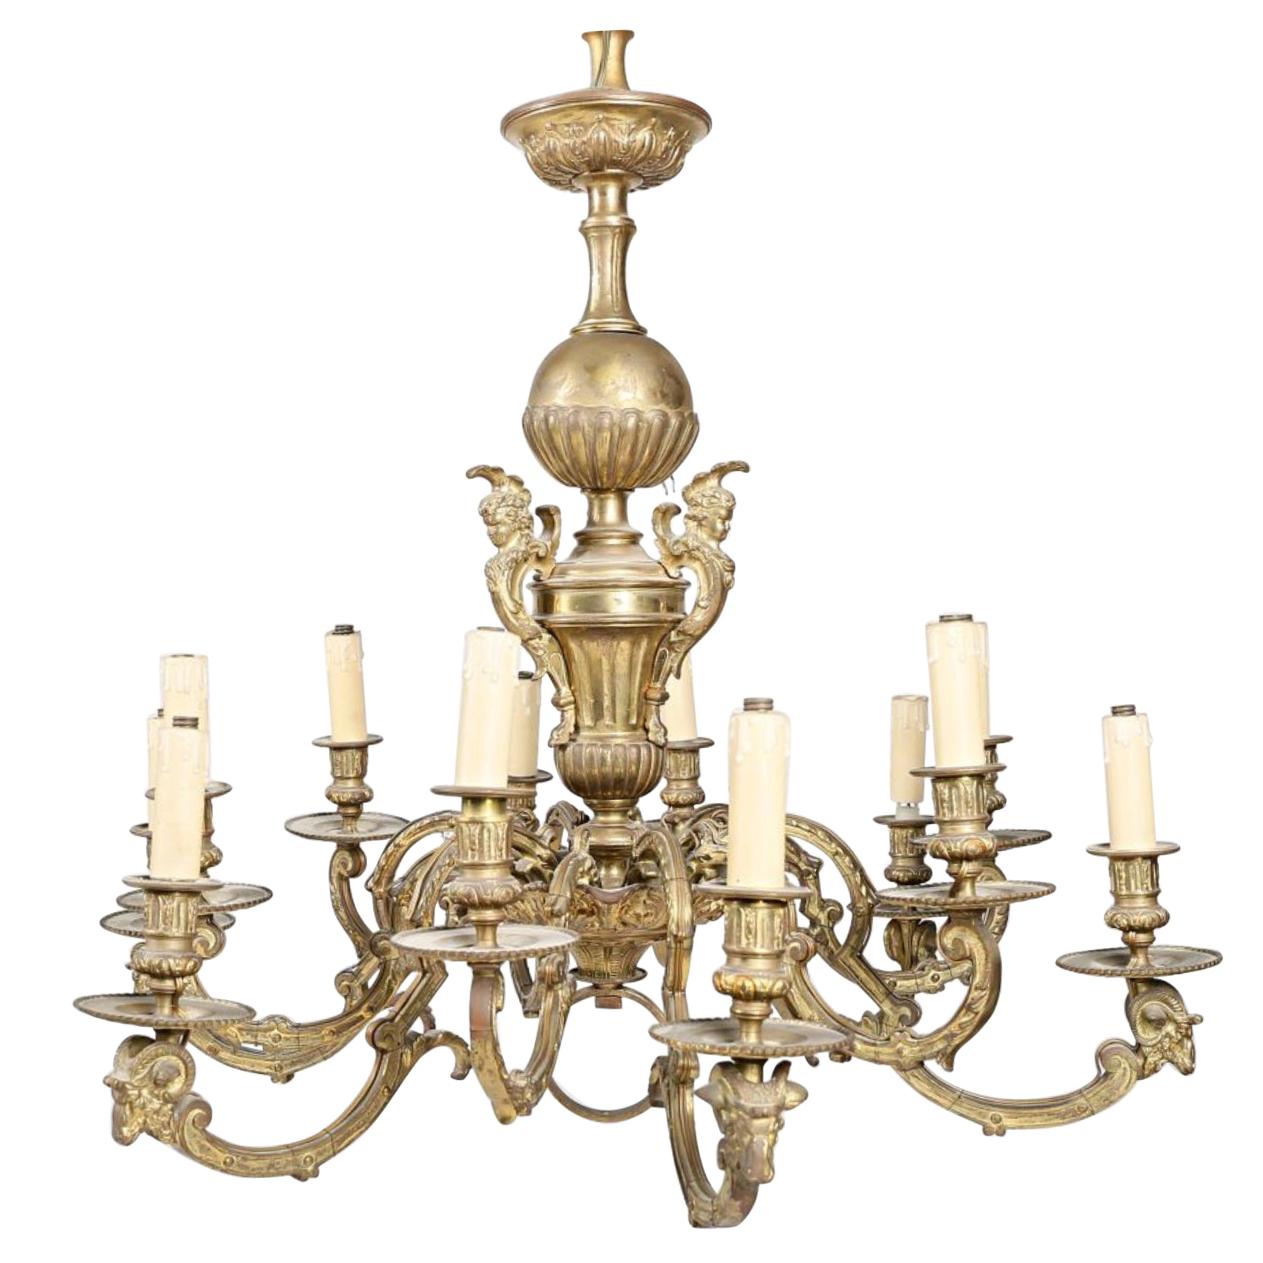 19th Century Large French Bronze Chandelier Decorated with Ram's Heads